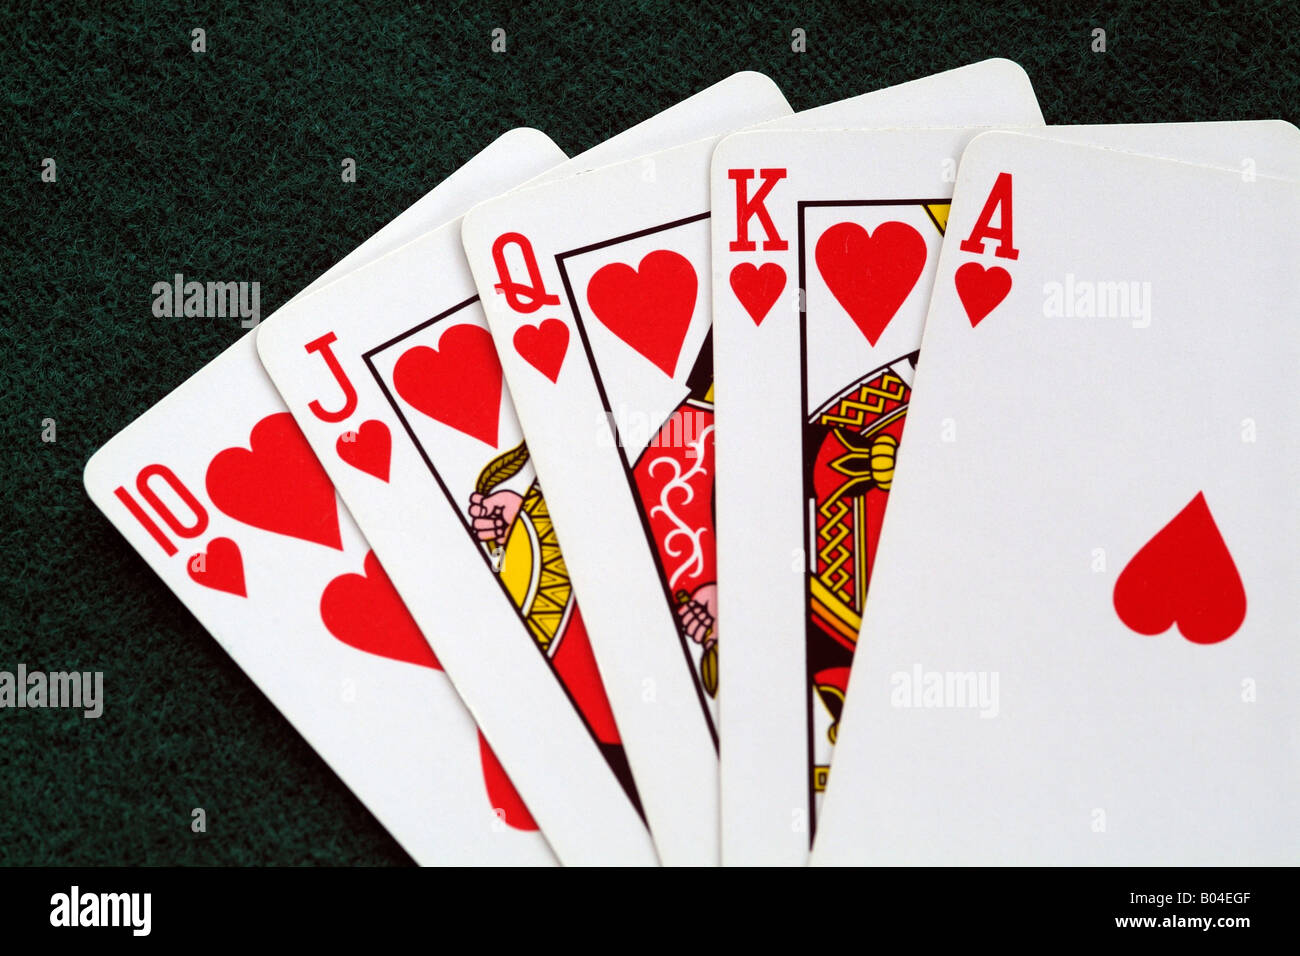 Poker Playing Cards Royal Flush the best possible hand Stock Photo - Alamy